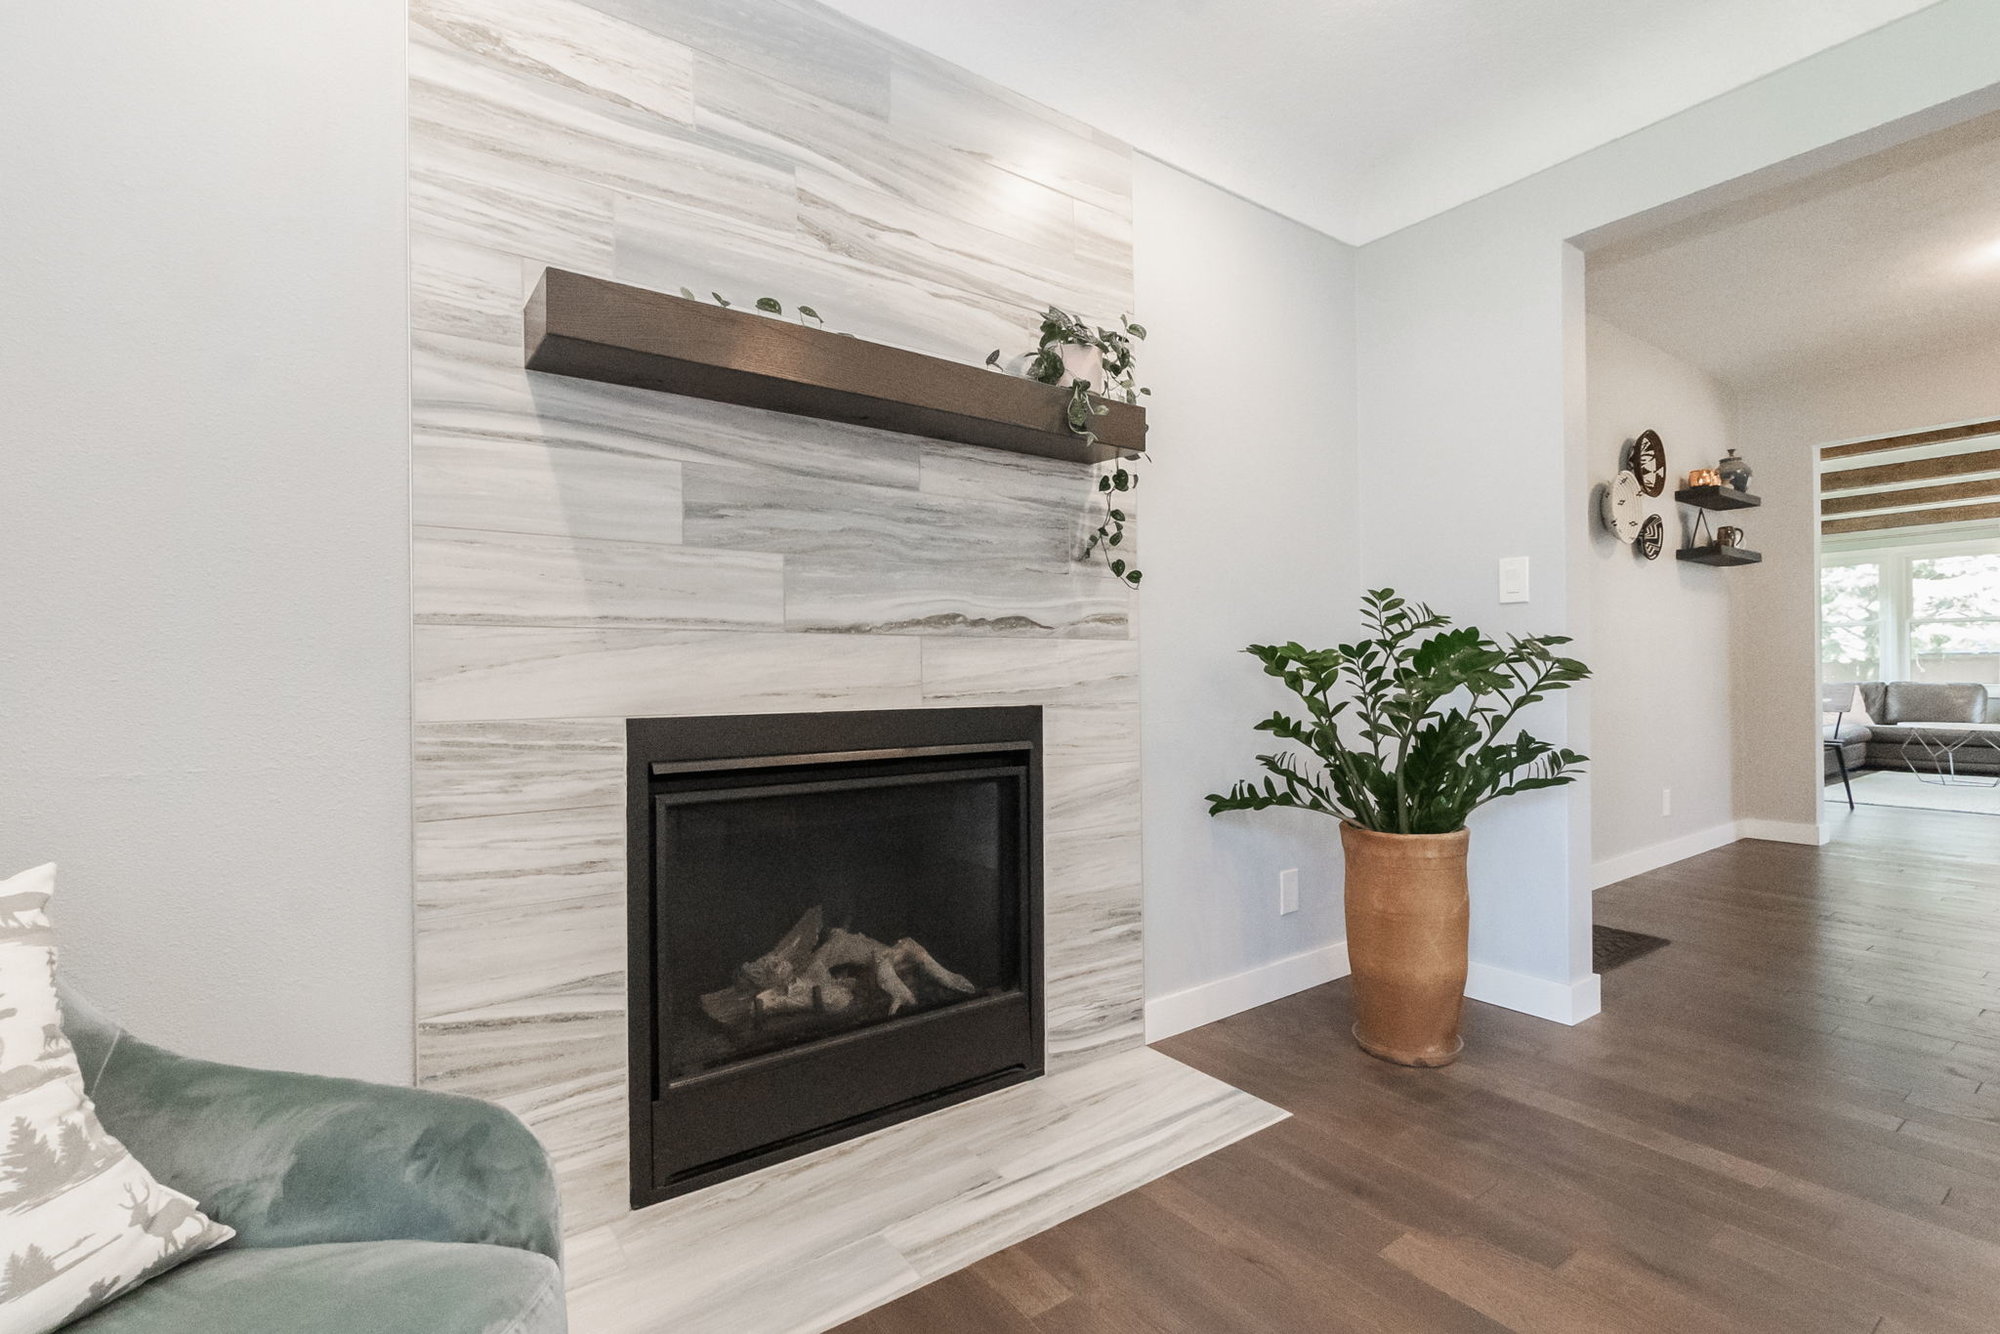 Floor to ceiling gas tile fireplace